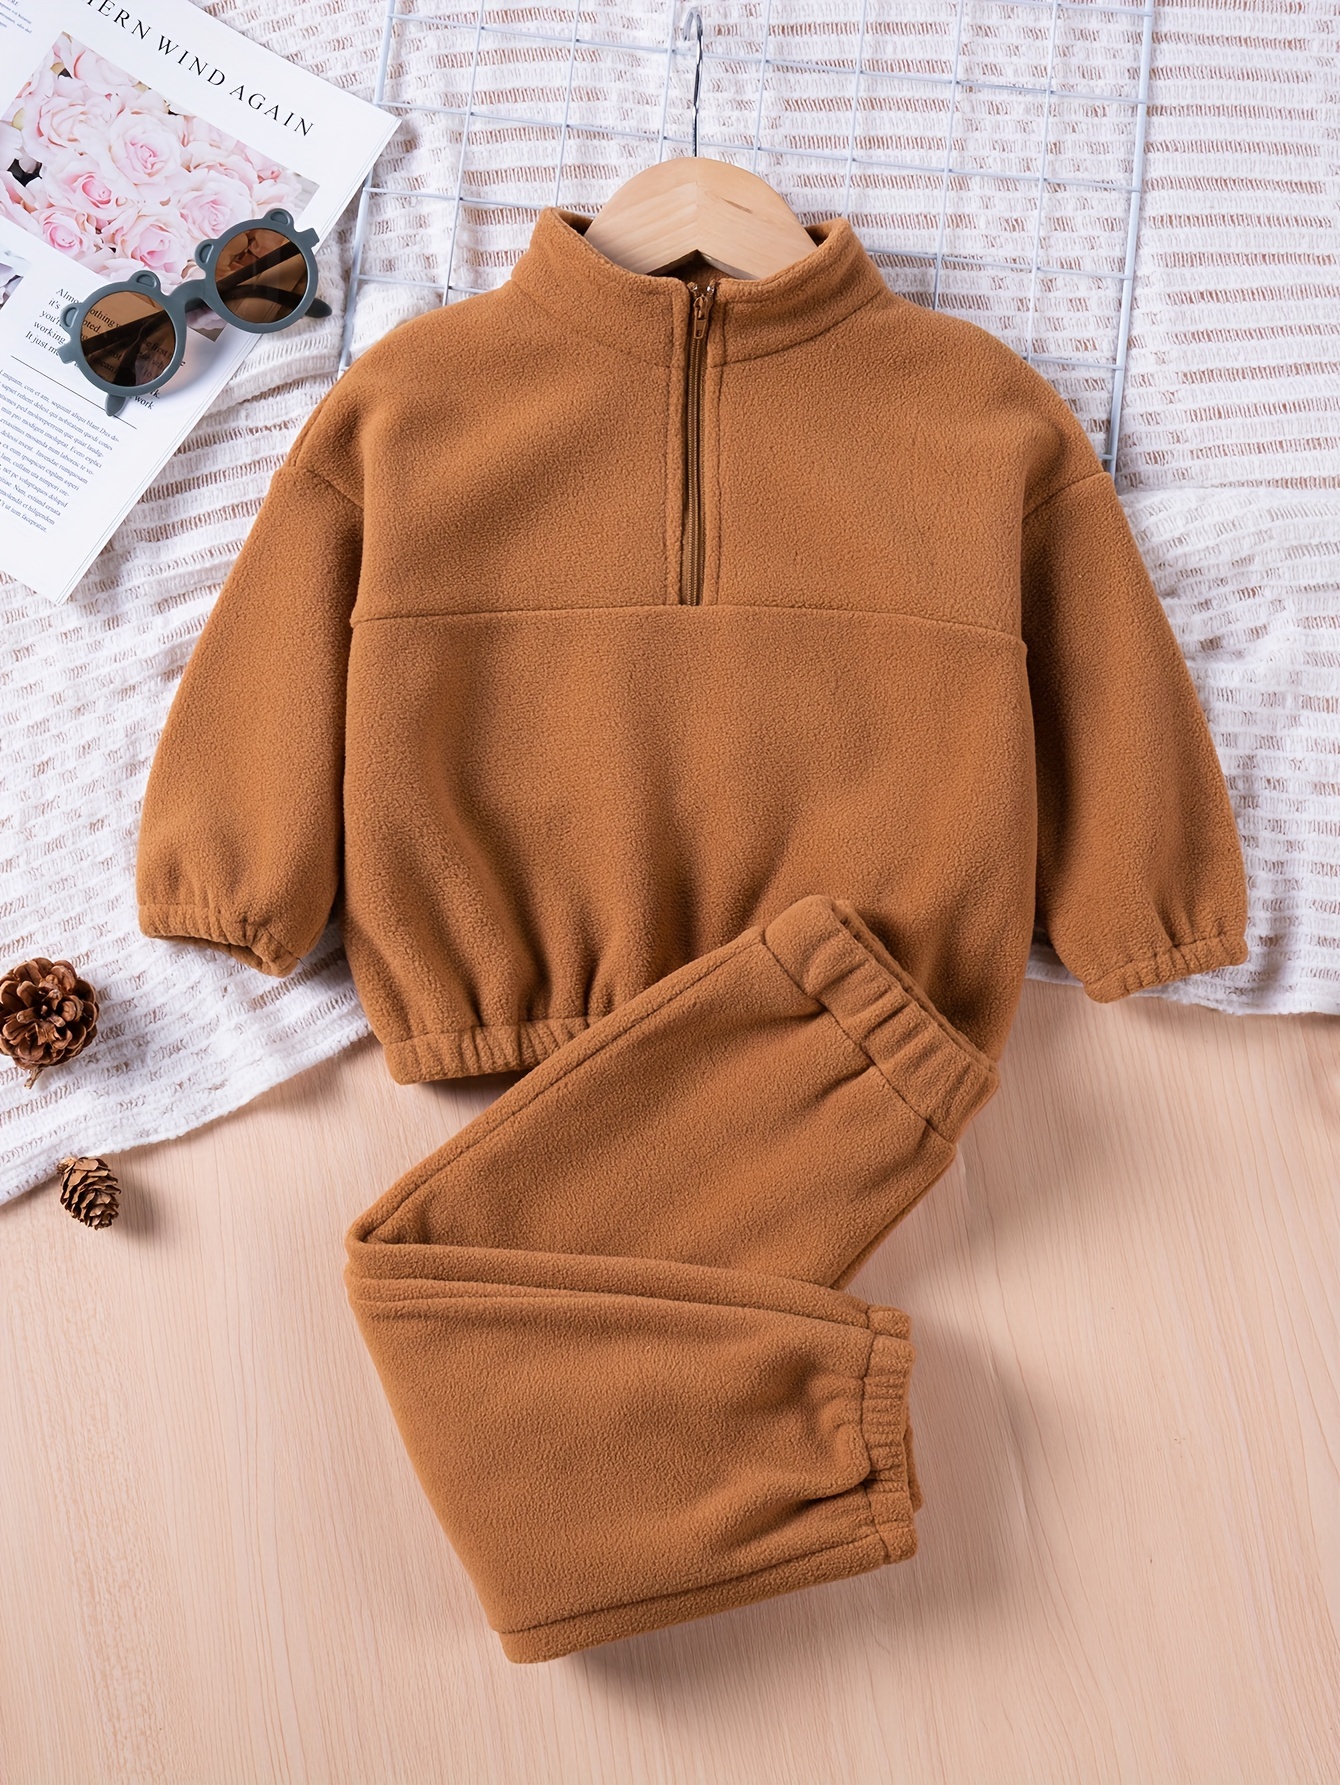 Winter Knit Sport Sweater and Jogger Set Outfits Warm Turtleneck